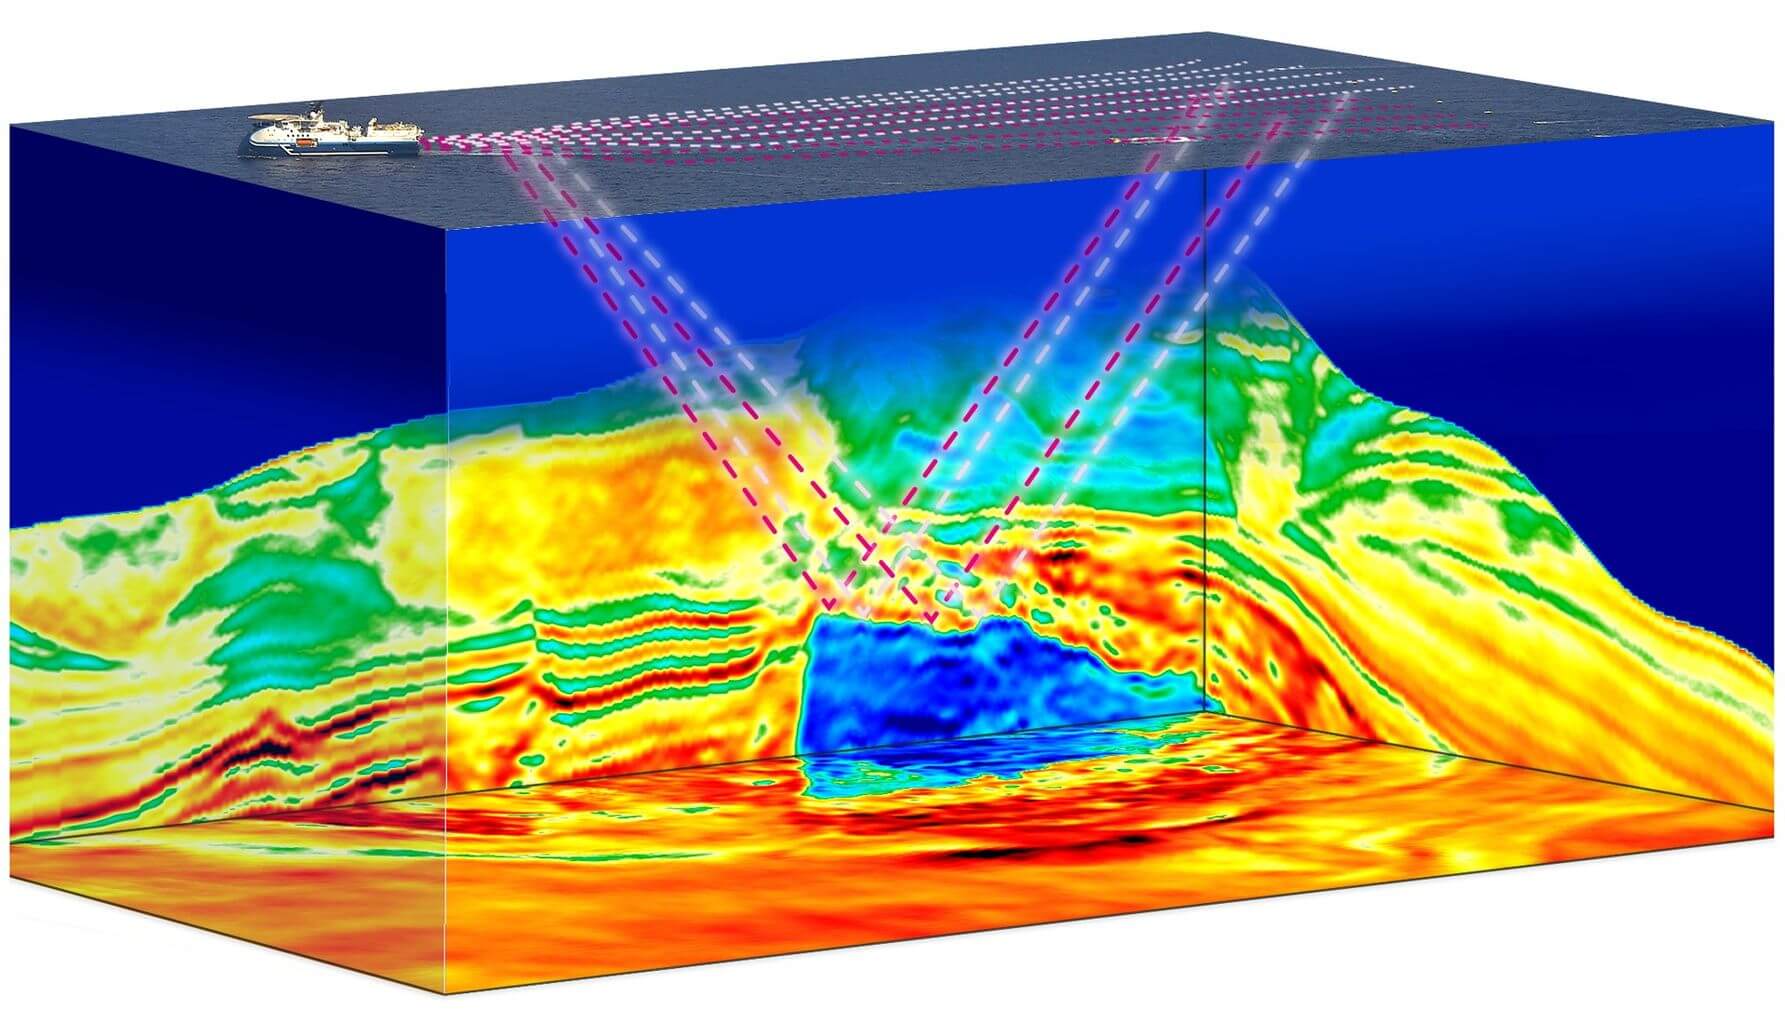 Subsurface imaging time-lapse 4D monitoring illustrated model